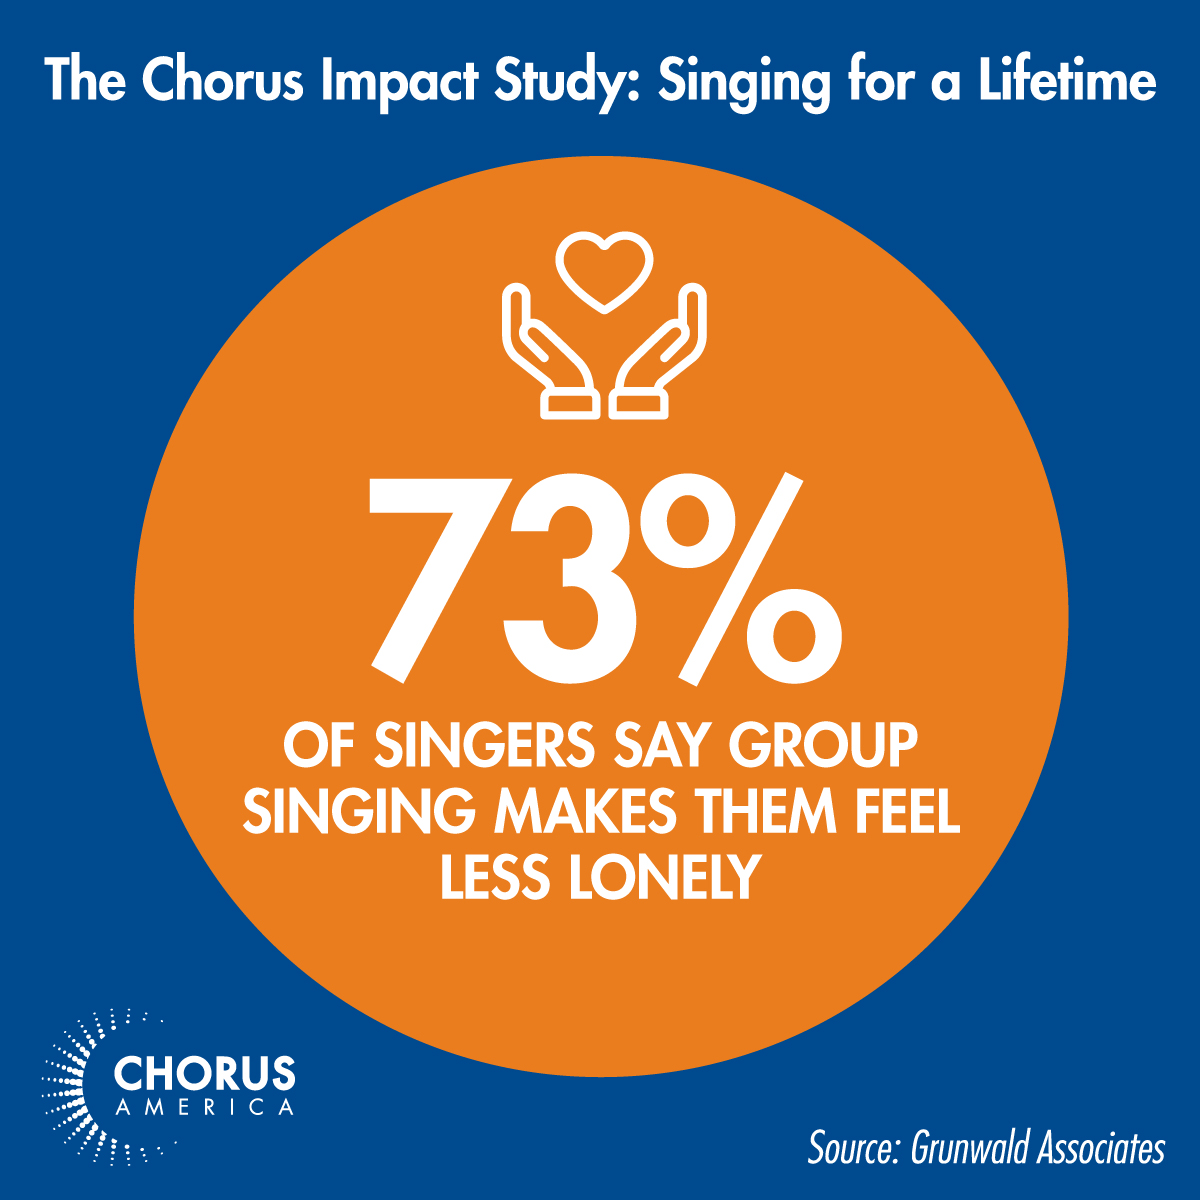 Chorus Impact Study: 73% of singers say group singing makes them feel less lonely